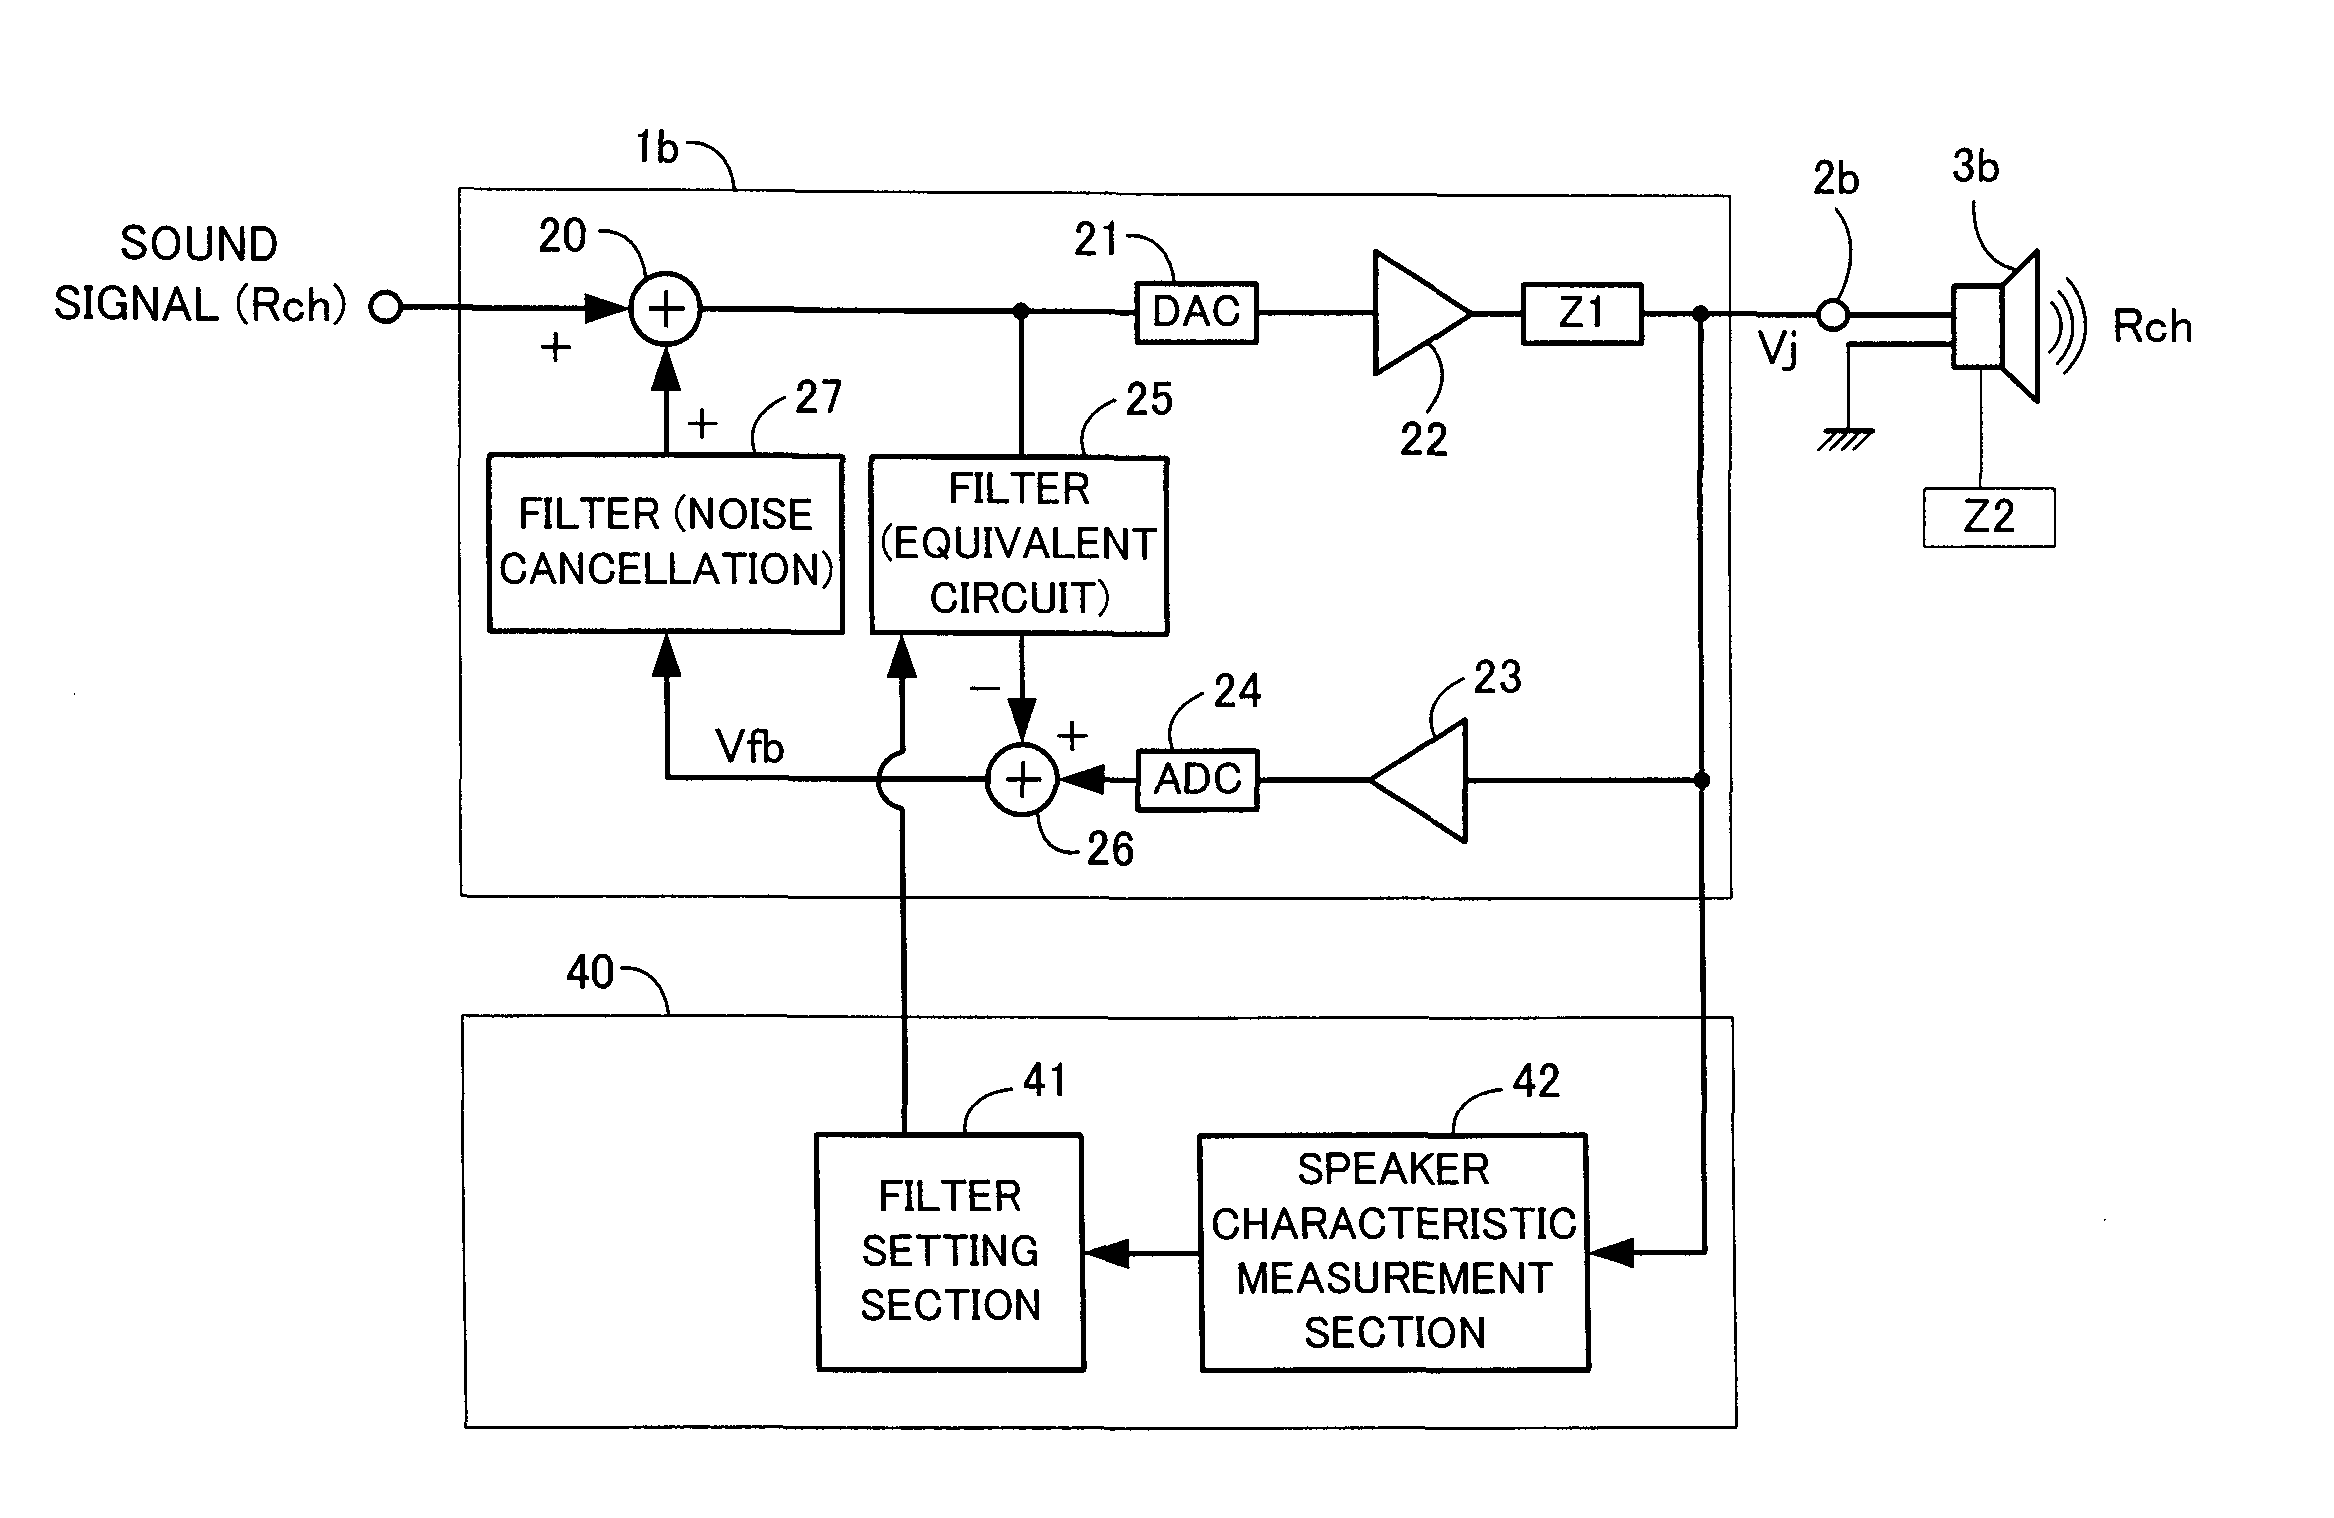 Ambient noise removal device